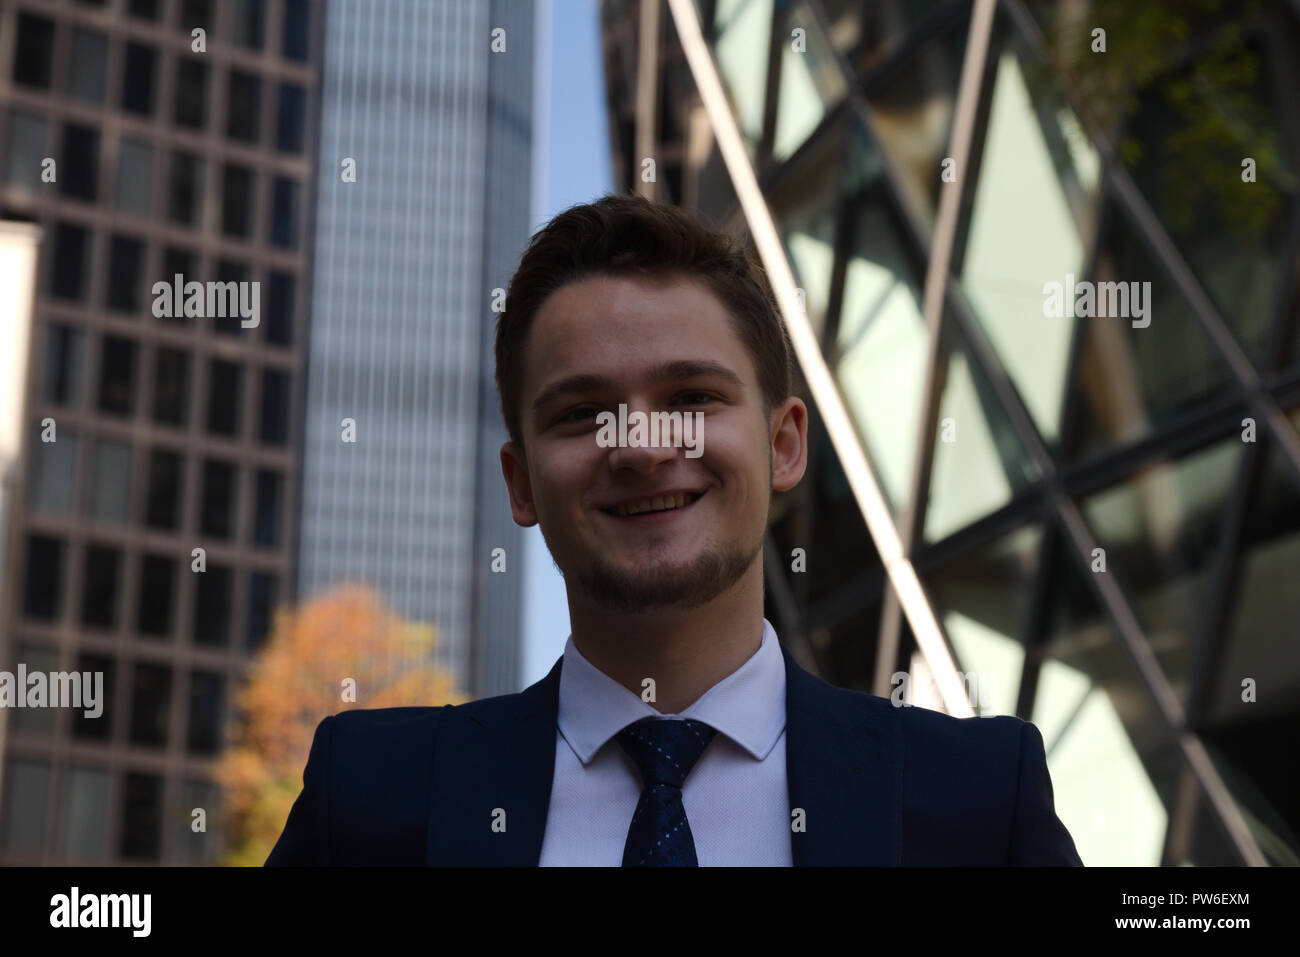 Portrait of successful smiling young business man in full suit outdoors Stock Photo